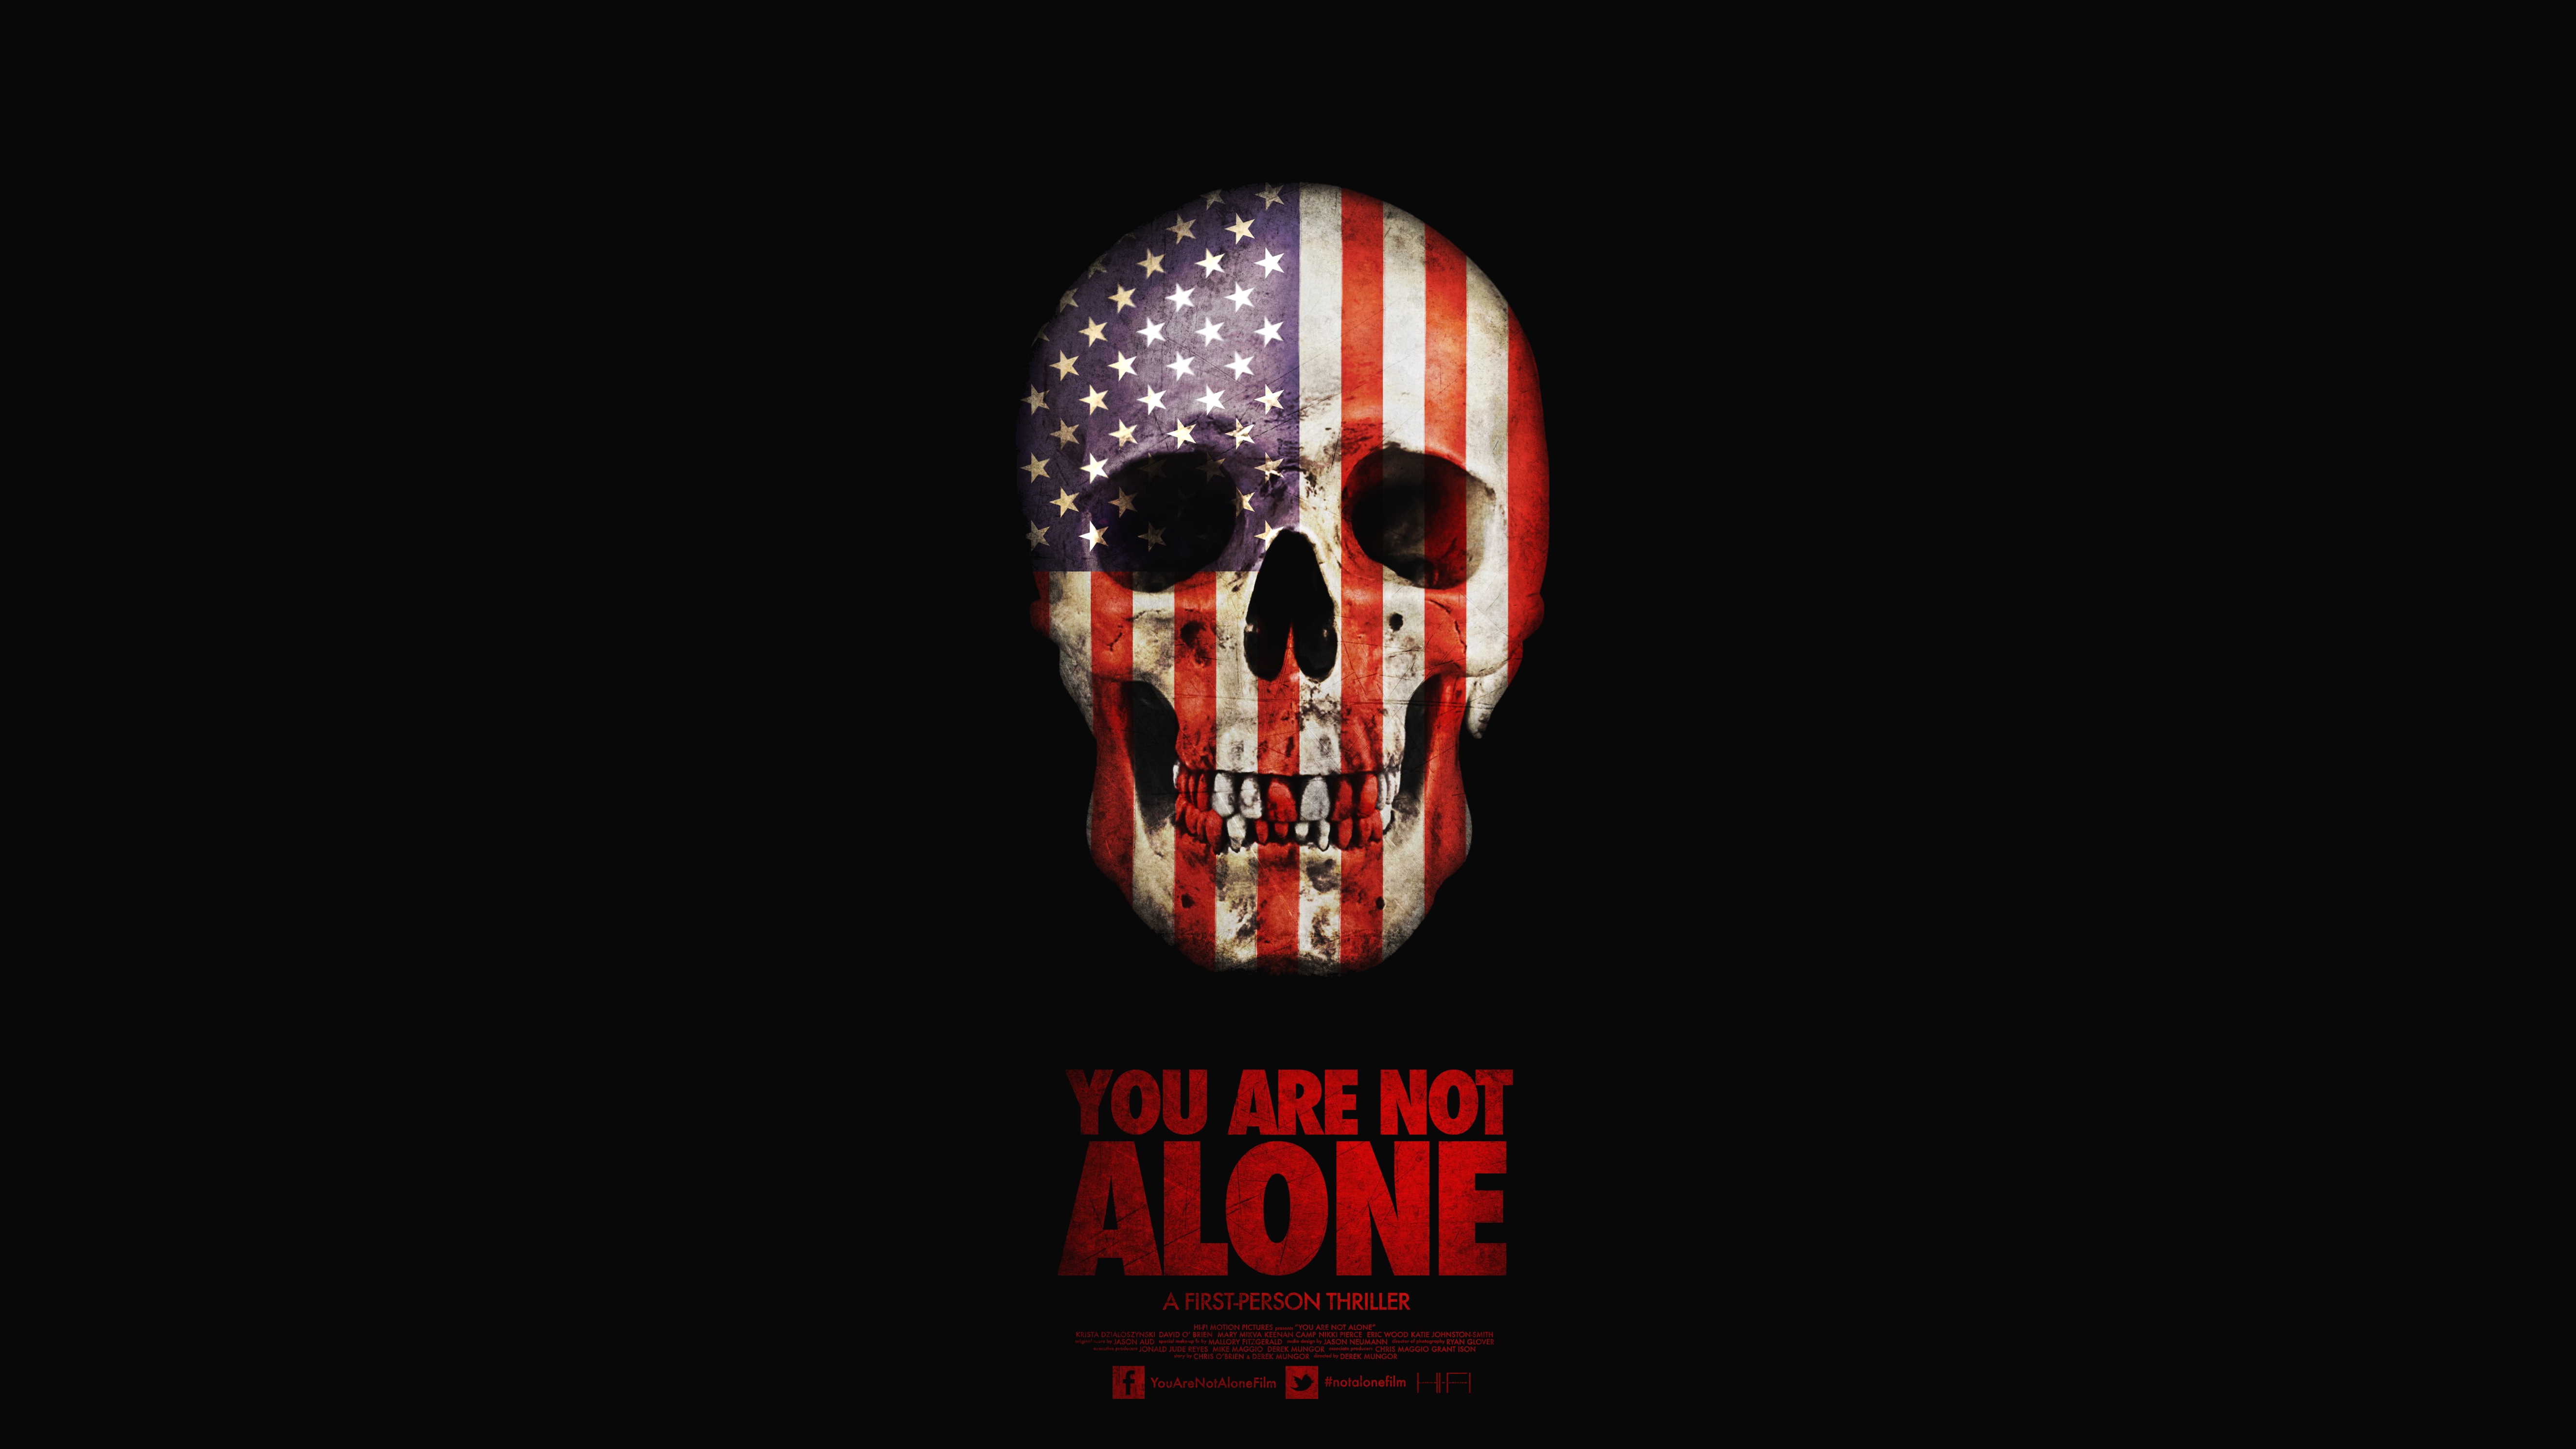 You Are Not Alone 4k Ultra HD Wallpaper